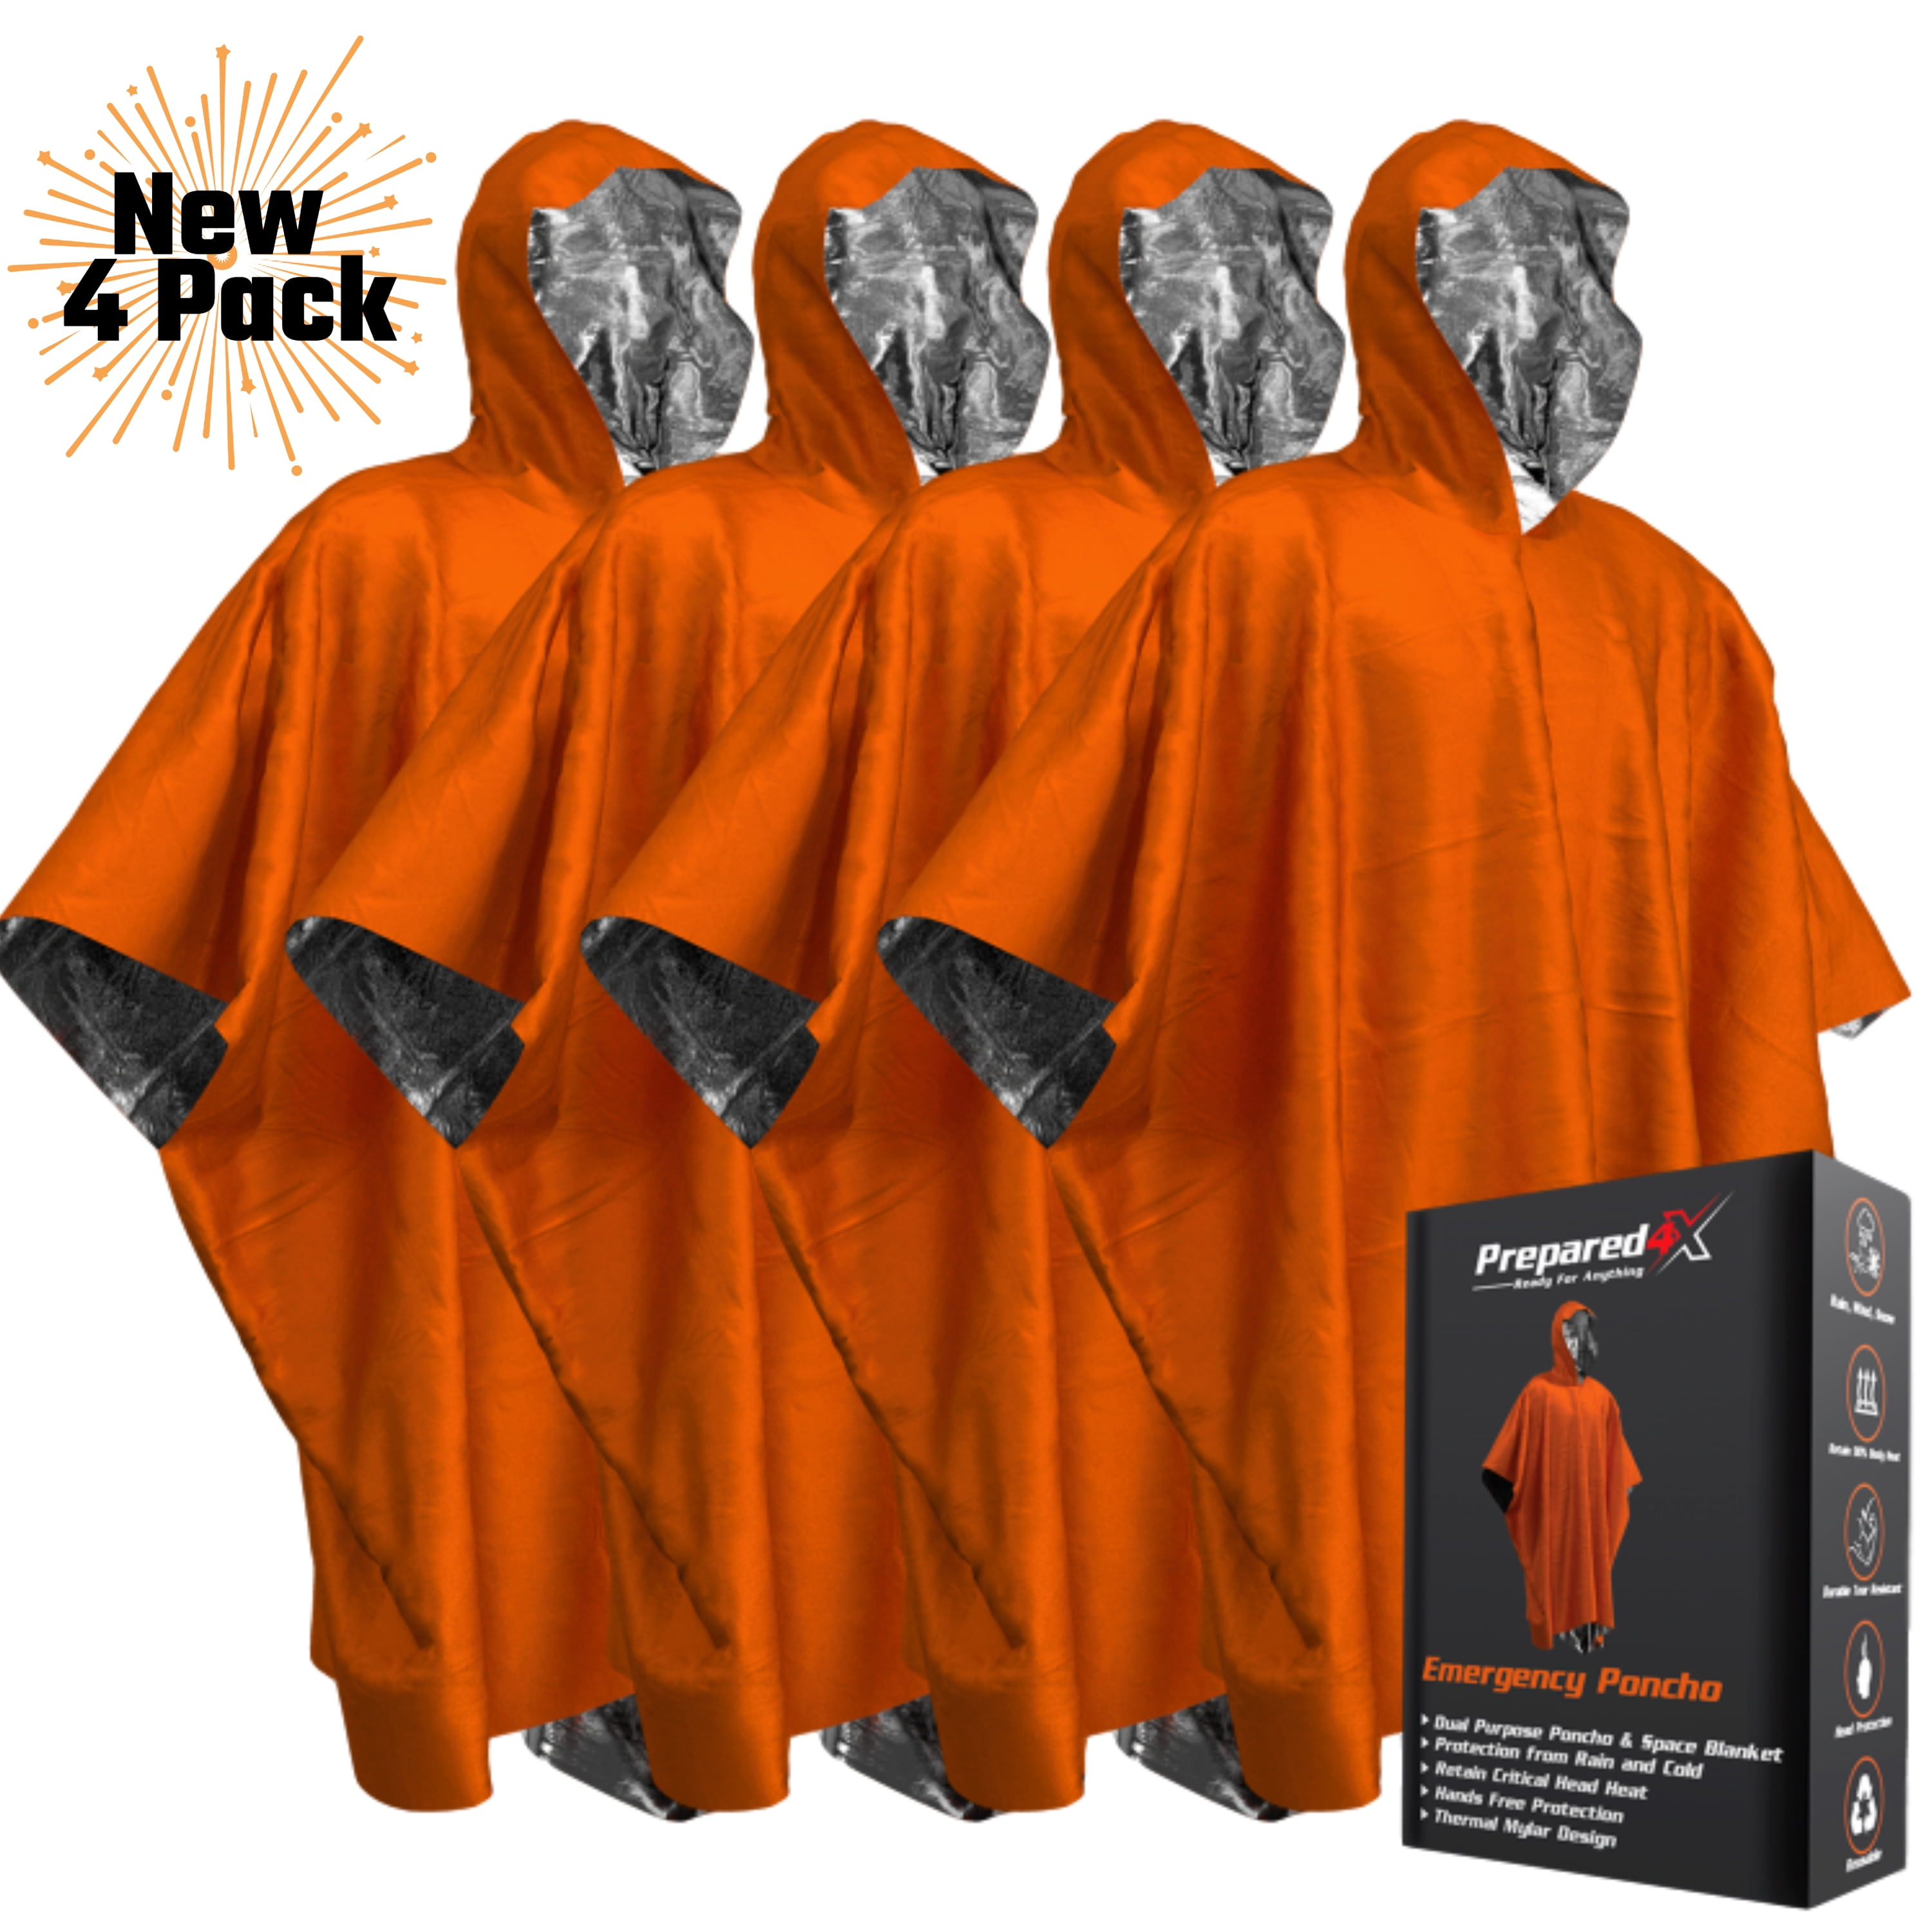 4Pack Reusable Mylar Thermal Blanket Poncho Emergency Survival Rain Camping 